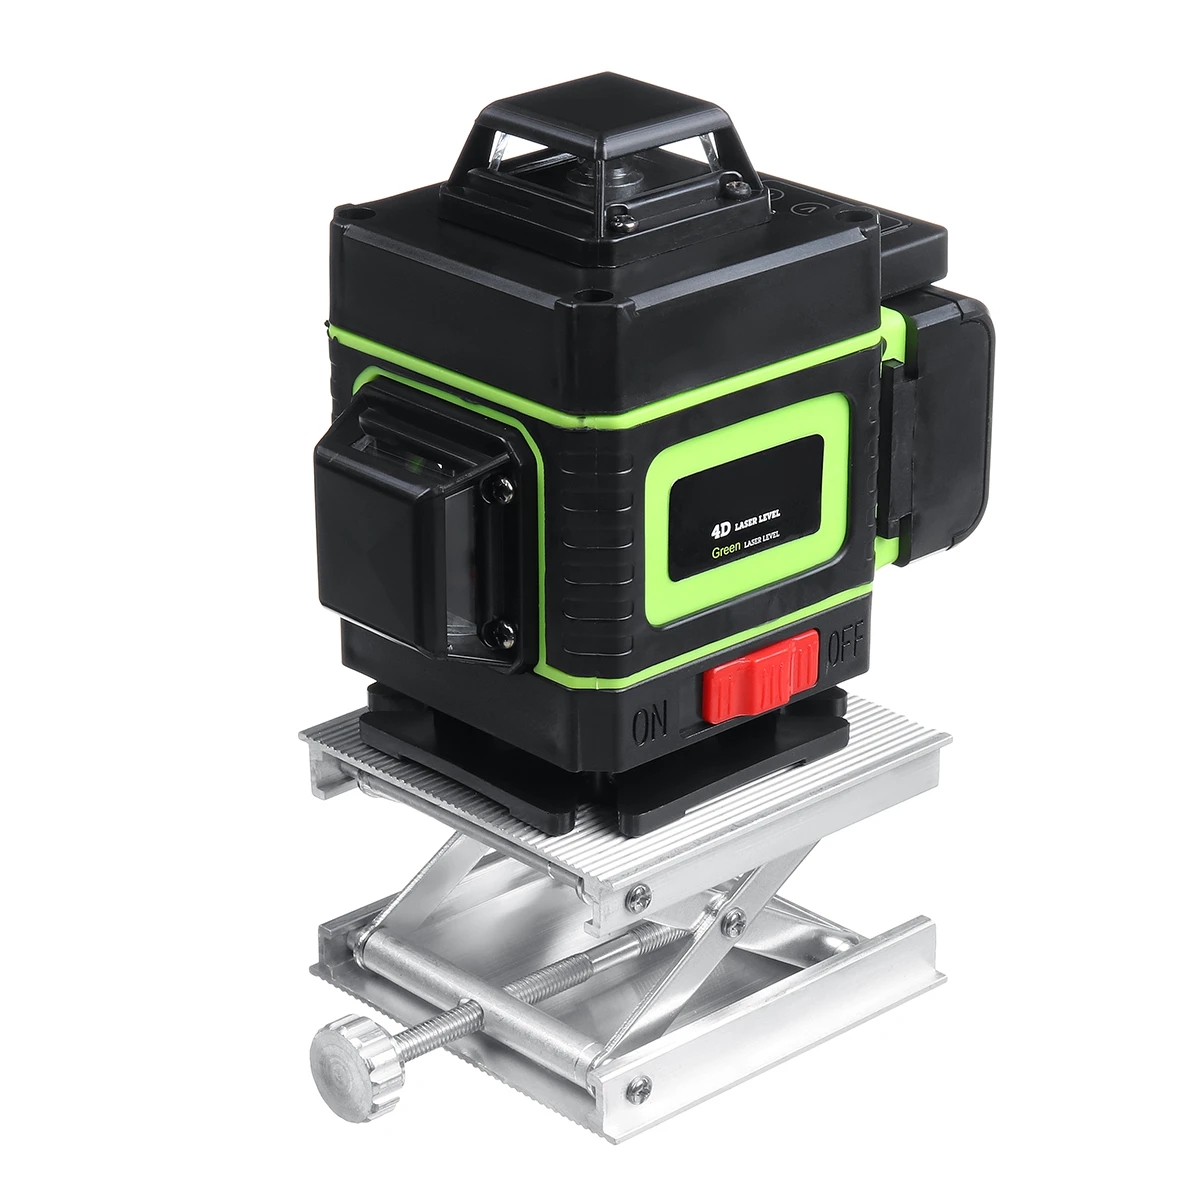 16-Line-Strong-Green-Light-3D-Remote-Control-Laser-Level-Measure-with-Wall-Attachment-Frame-1853062-8